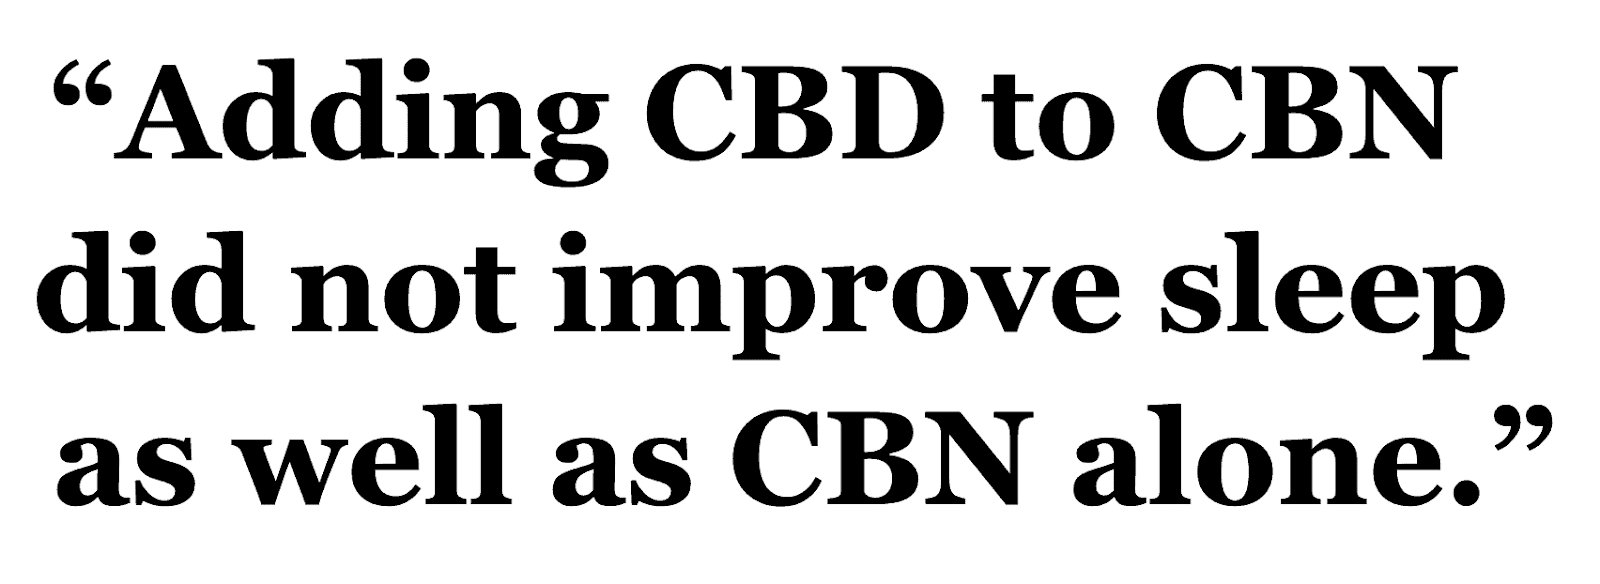 Adding CBD to CBN did not improve sleep as well as CBN alone.